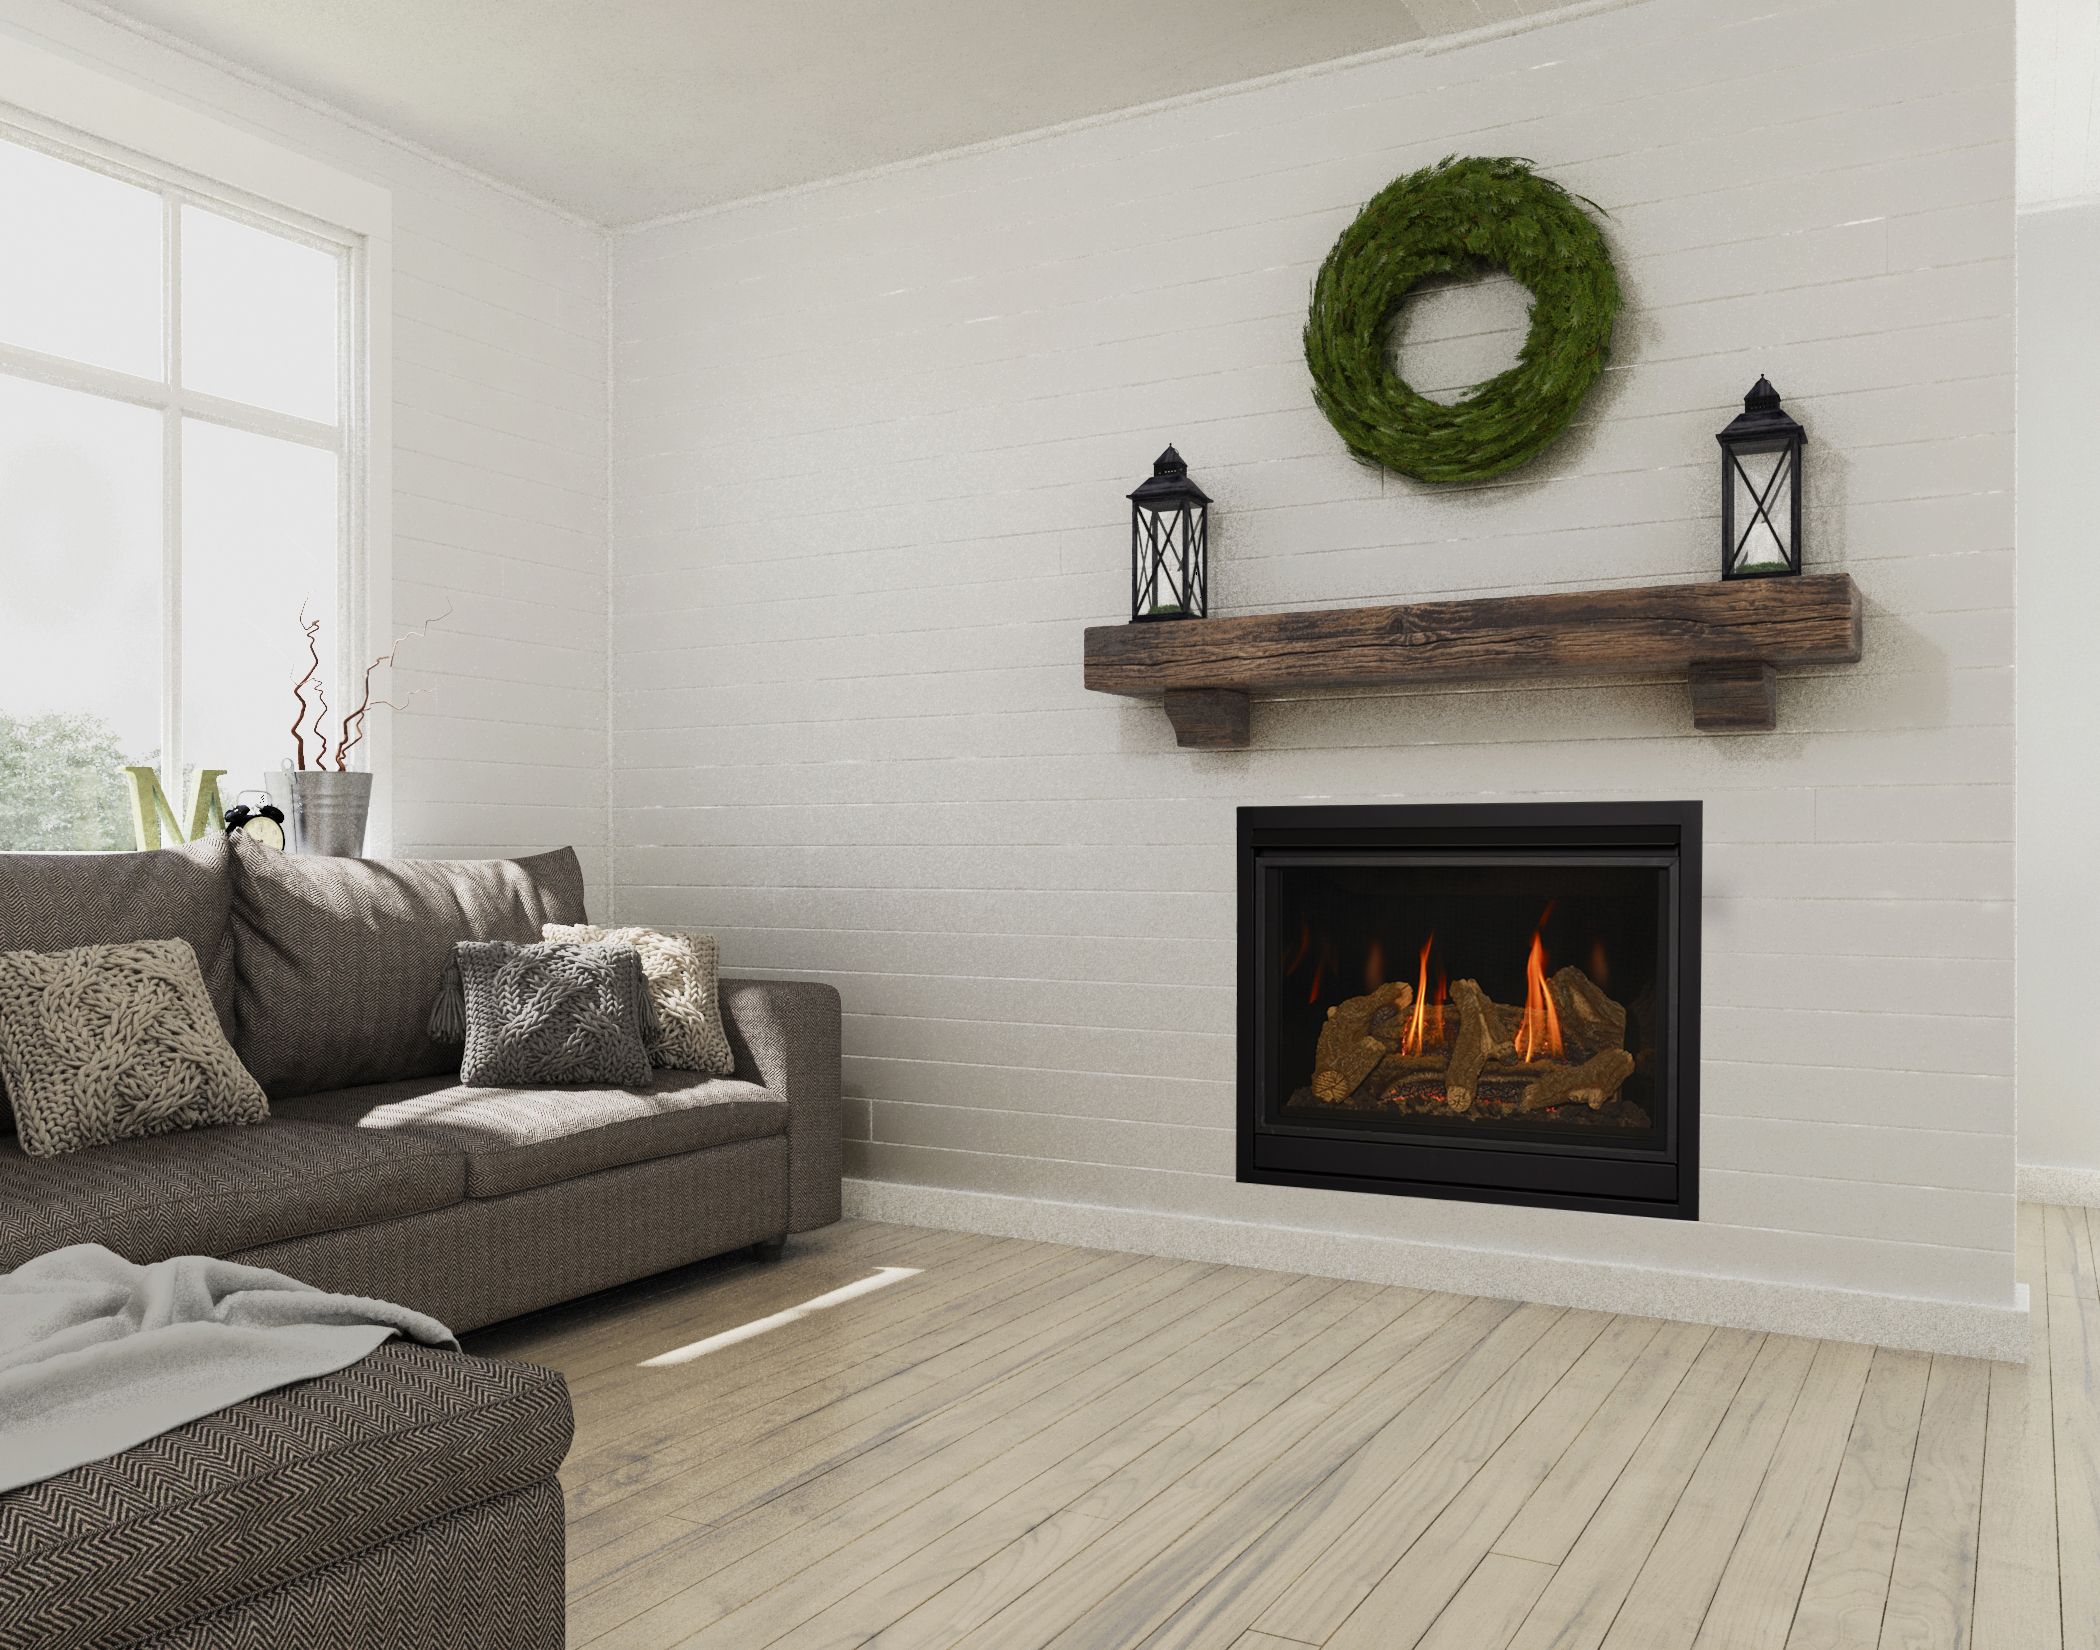 6 Reasons Why You Need a Fireplace